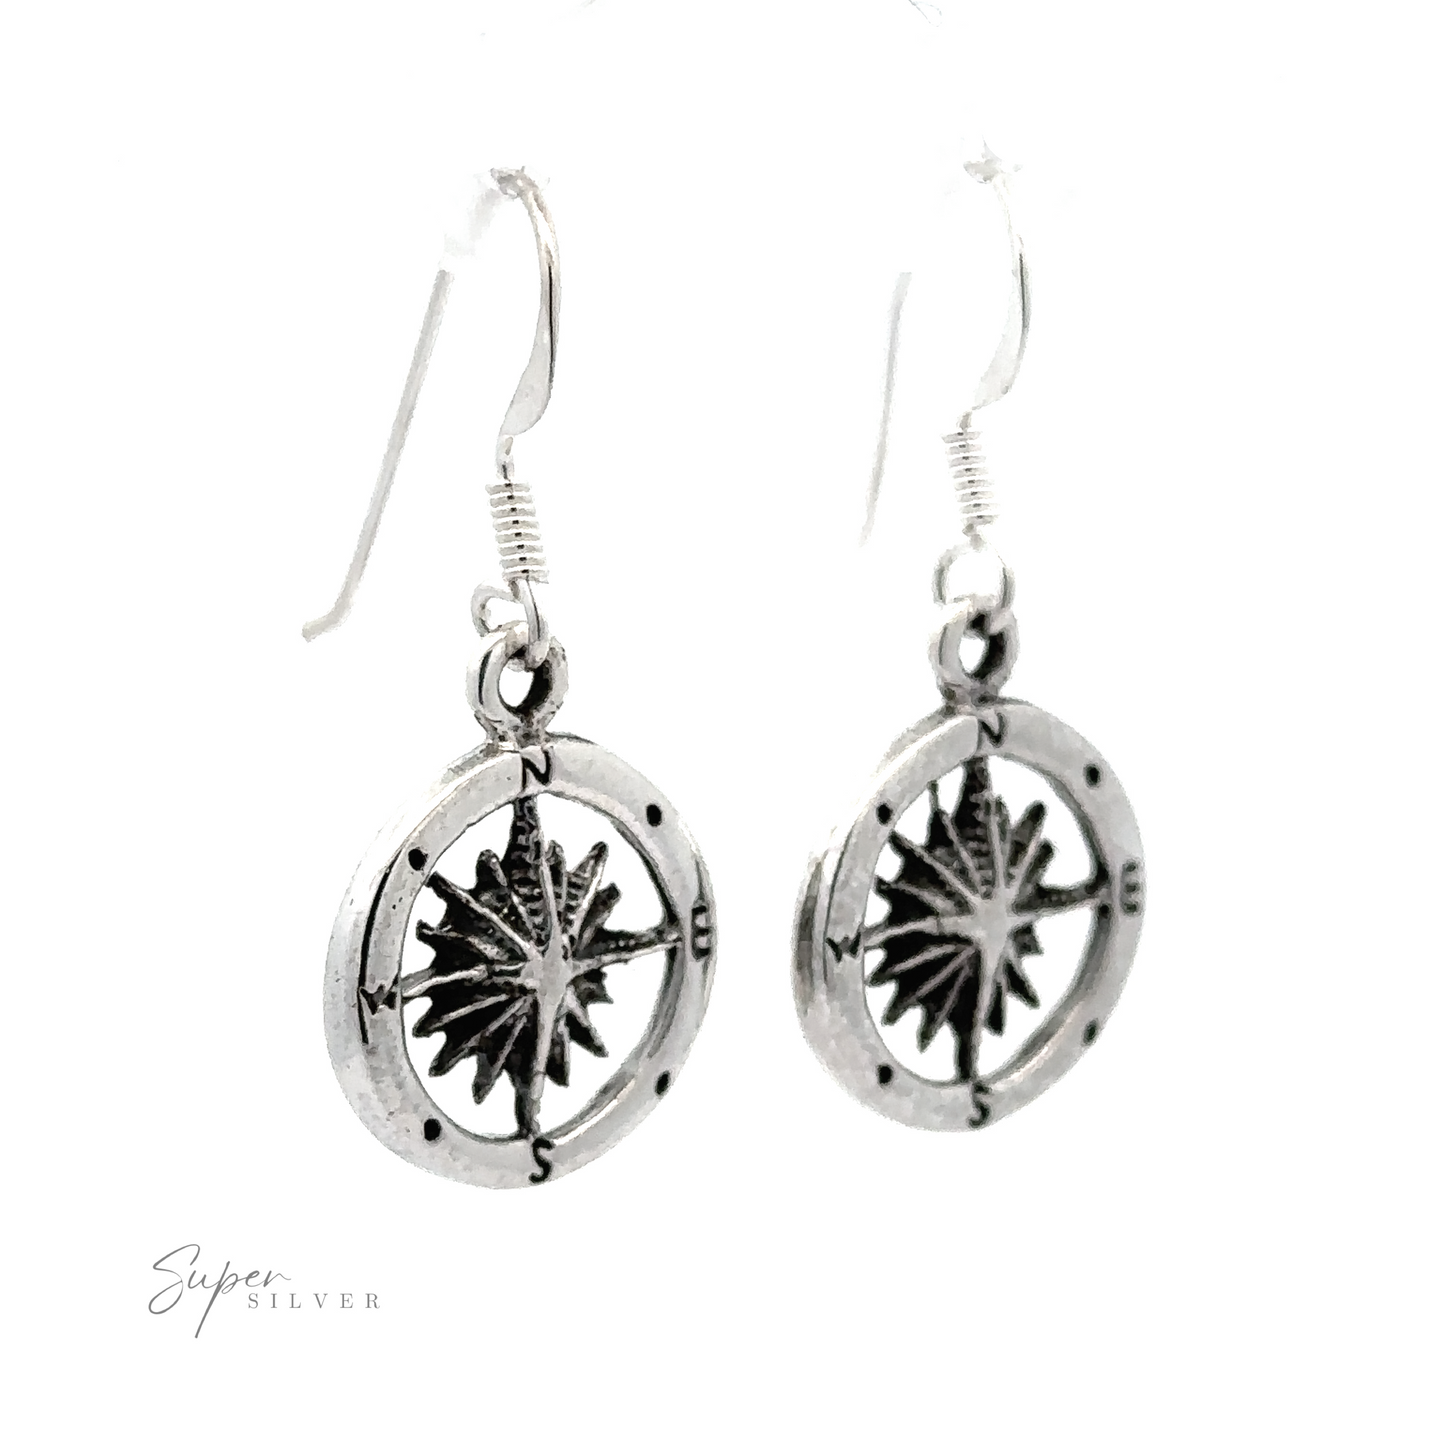 A pair of Compass Dangling Earrings featuring circular pendants with a compass cutout design, isolated against a white background.